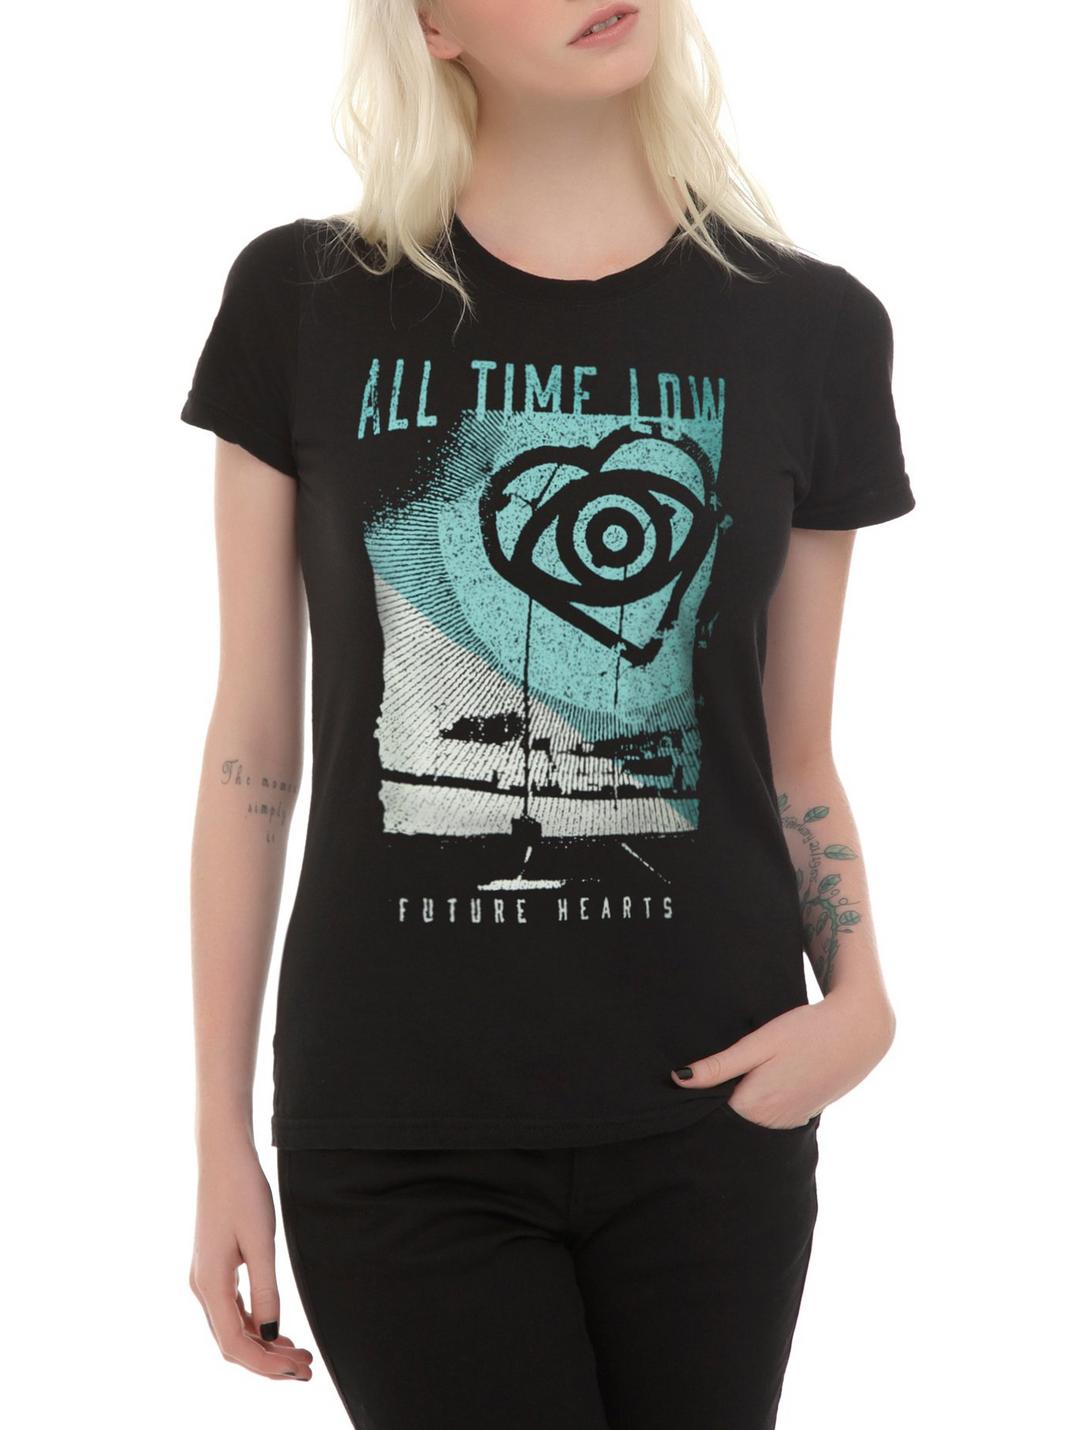 All Time Low Future Hearts Girls T-Shirt, BLACK, hi-res